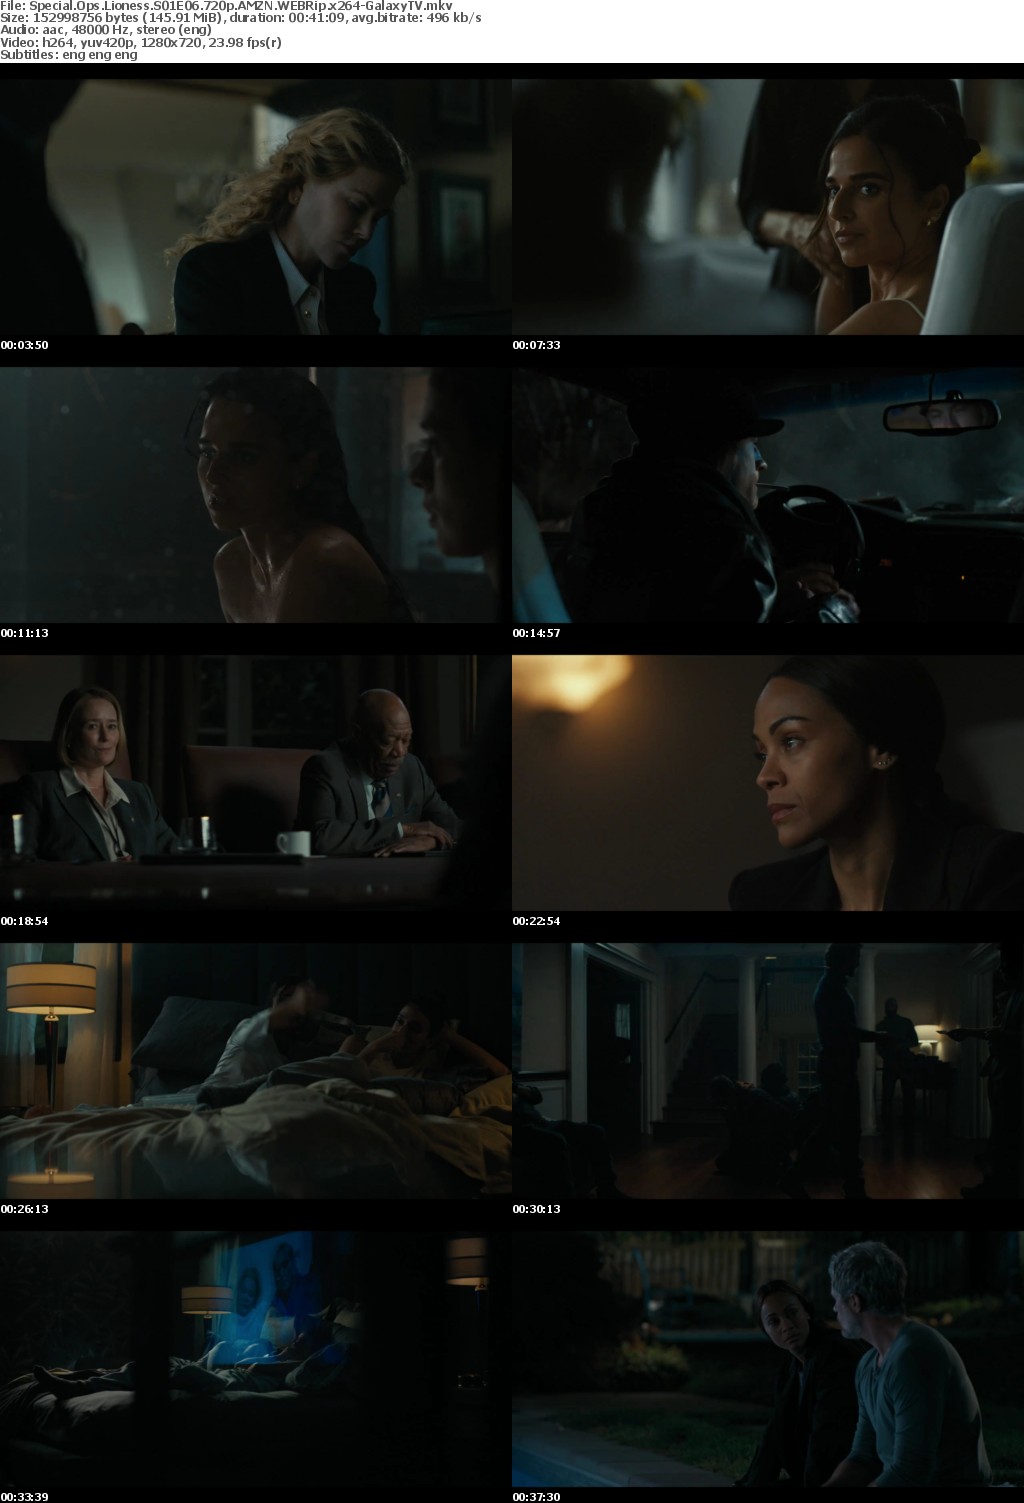 Special Ops Lioness S01 COMPLETE 720p AMZN WEBRip x264-GalaxyTV